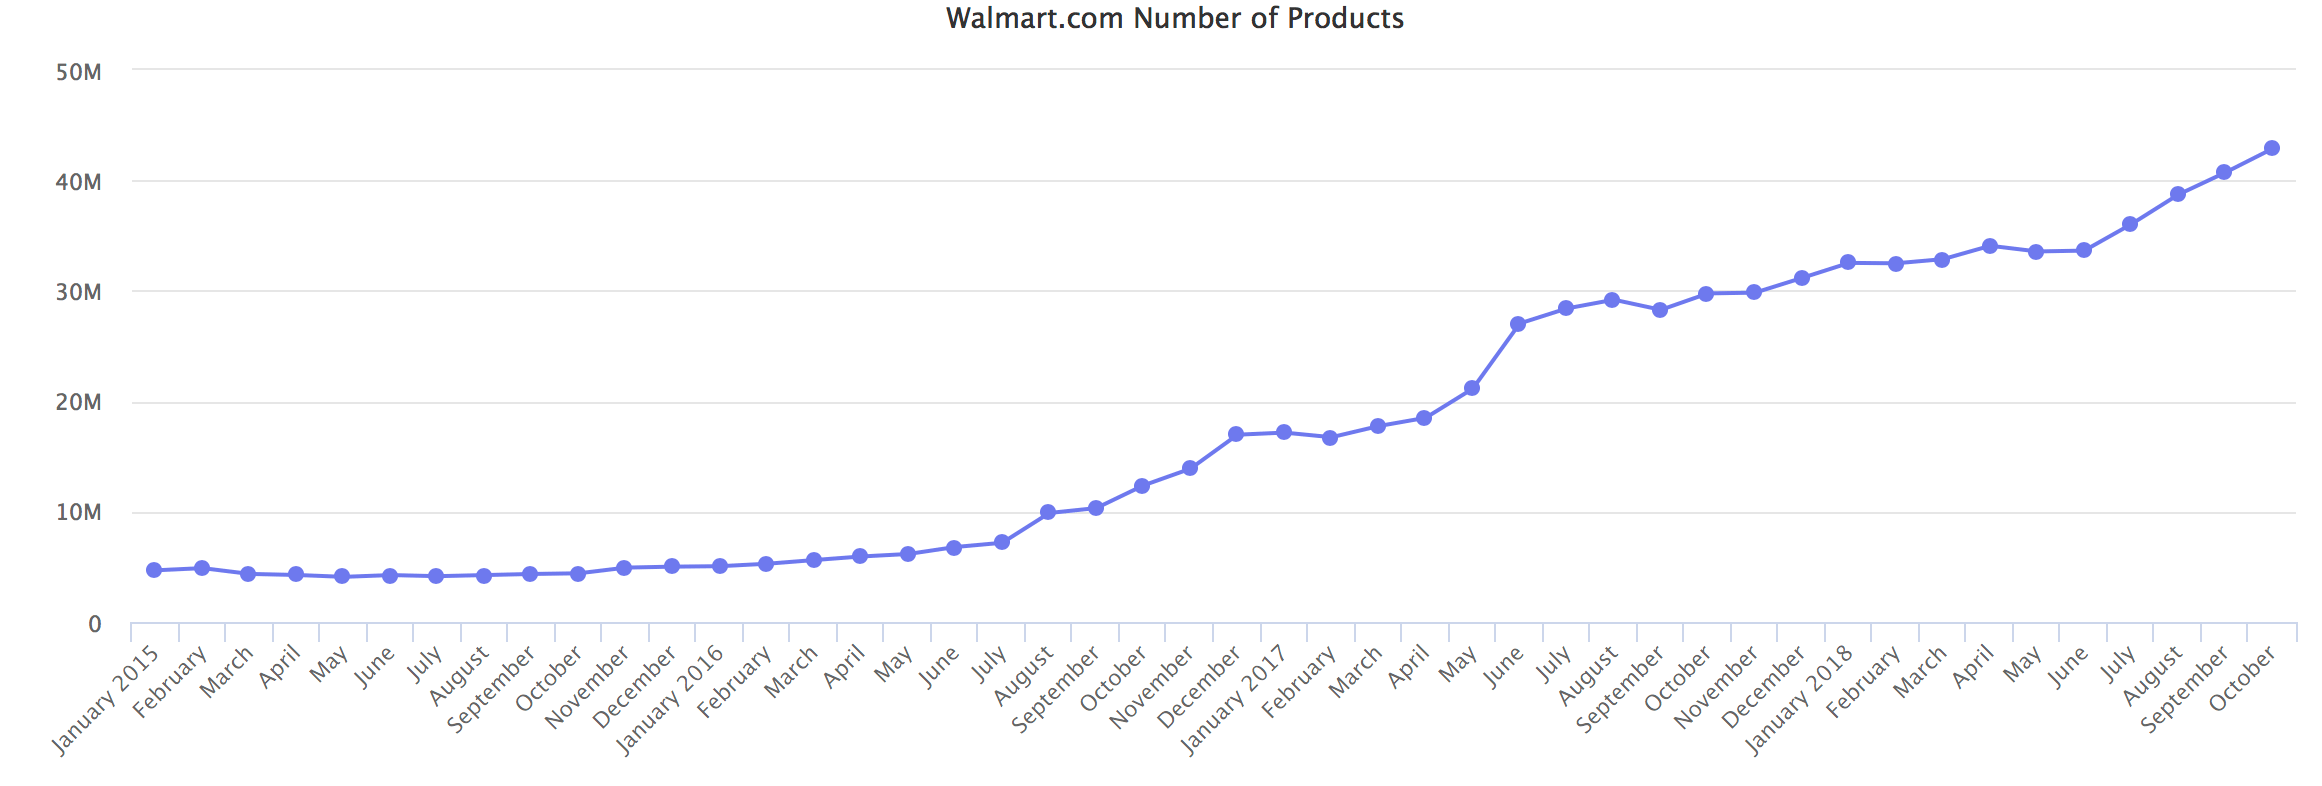 Walmart Number of Products